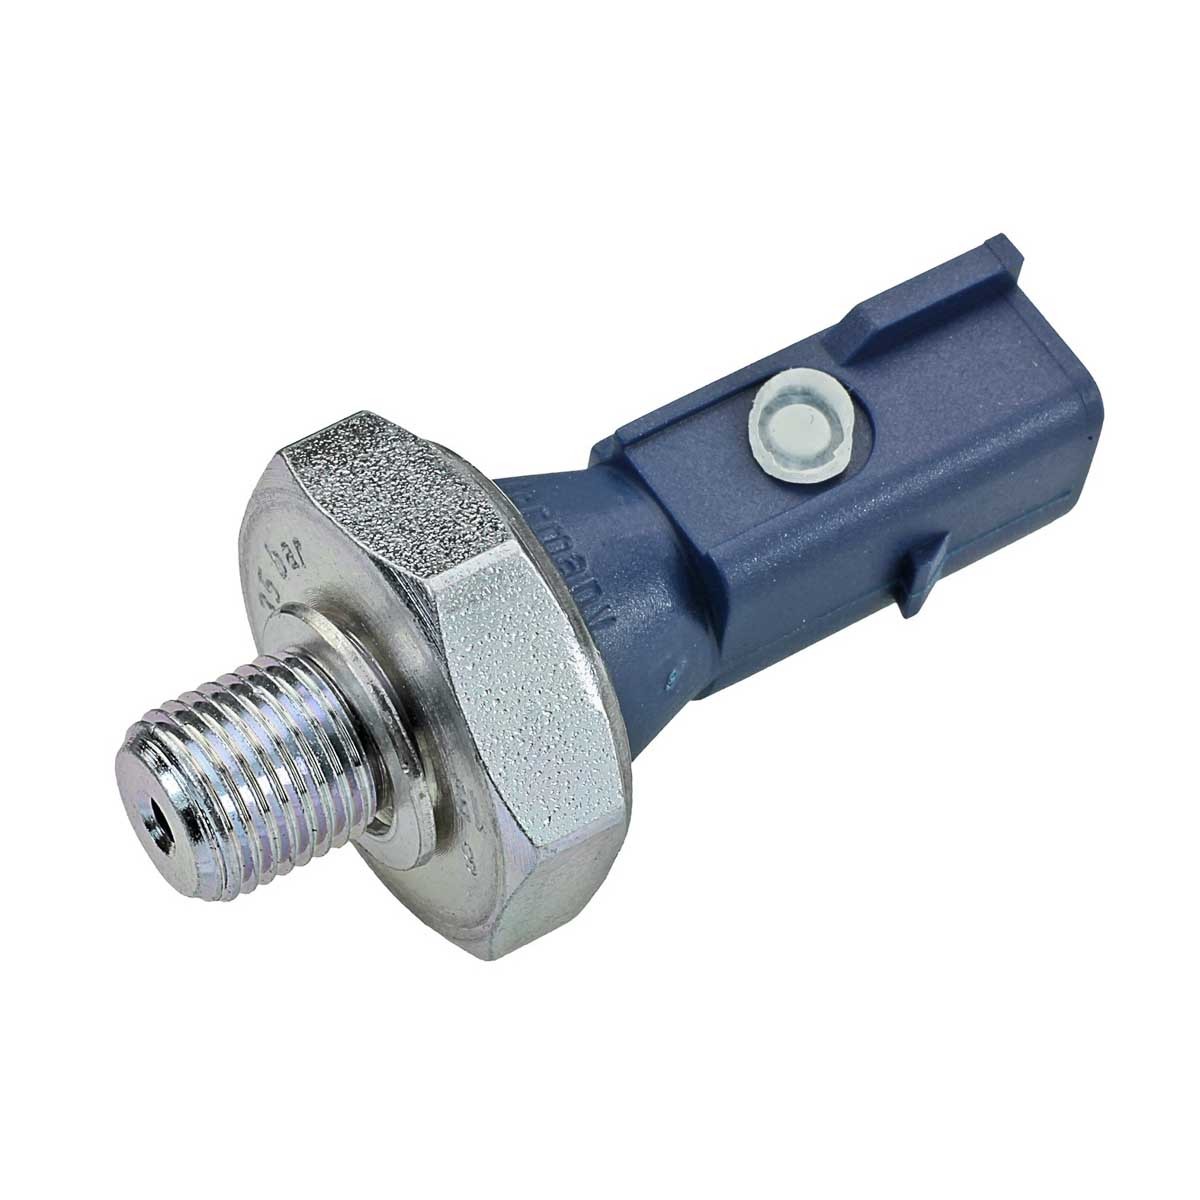 MMX1328 MEYLE M10 x 1, 0,15 - 0,35 bar, ORIGINAL Quality Number of pins: 1-pin connector Oil Pressure Switch 114 820 0006 buy